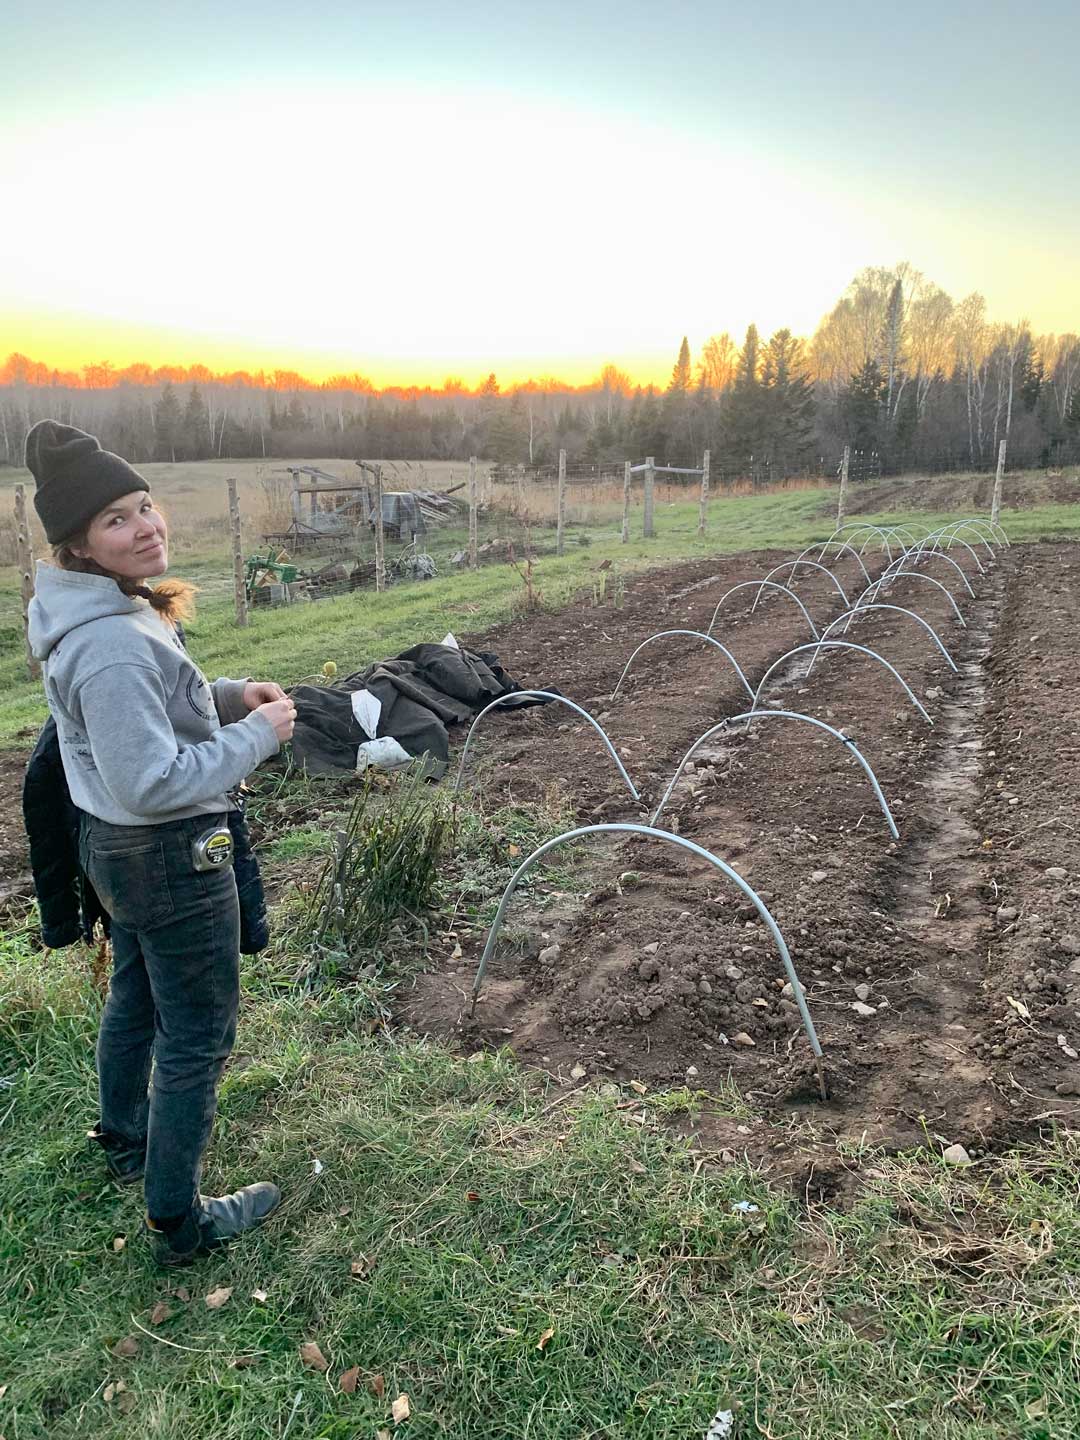 A person wearing a beanie, hoodie, and jeans stands next to a freshly prepared garden bed with metal hoops under a sunset sky. The garden bed is ready for planting, and there's a rustic fence and trees in the background. The person is smiling and holding some small objects.